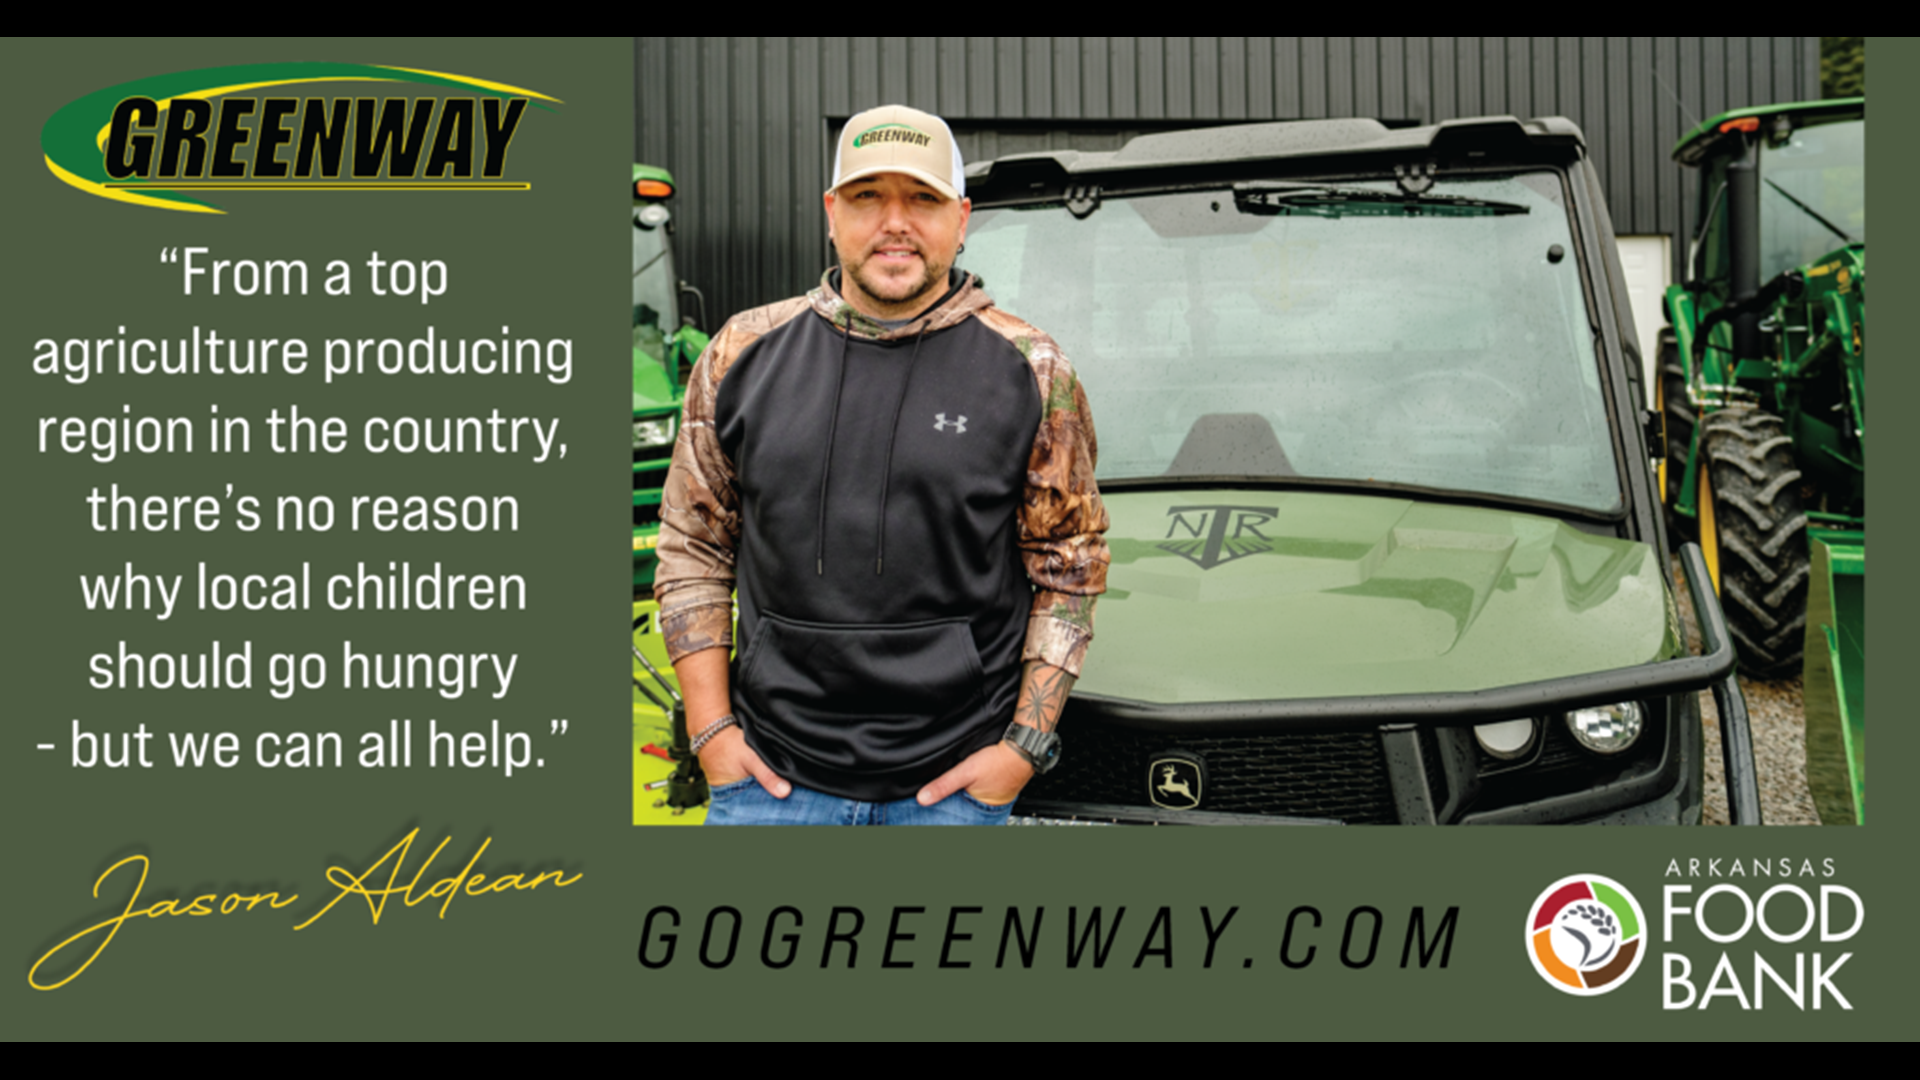 Greenway Equipment and and Jason Aldean have partnered with local food banks to raise proceeds for their Backpack Programs.